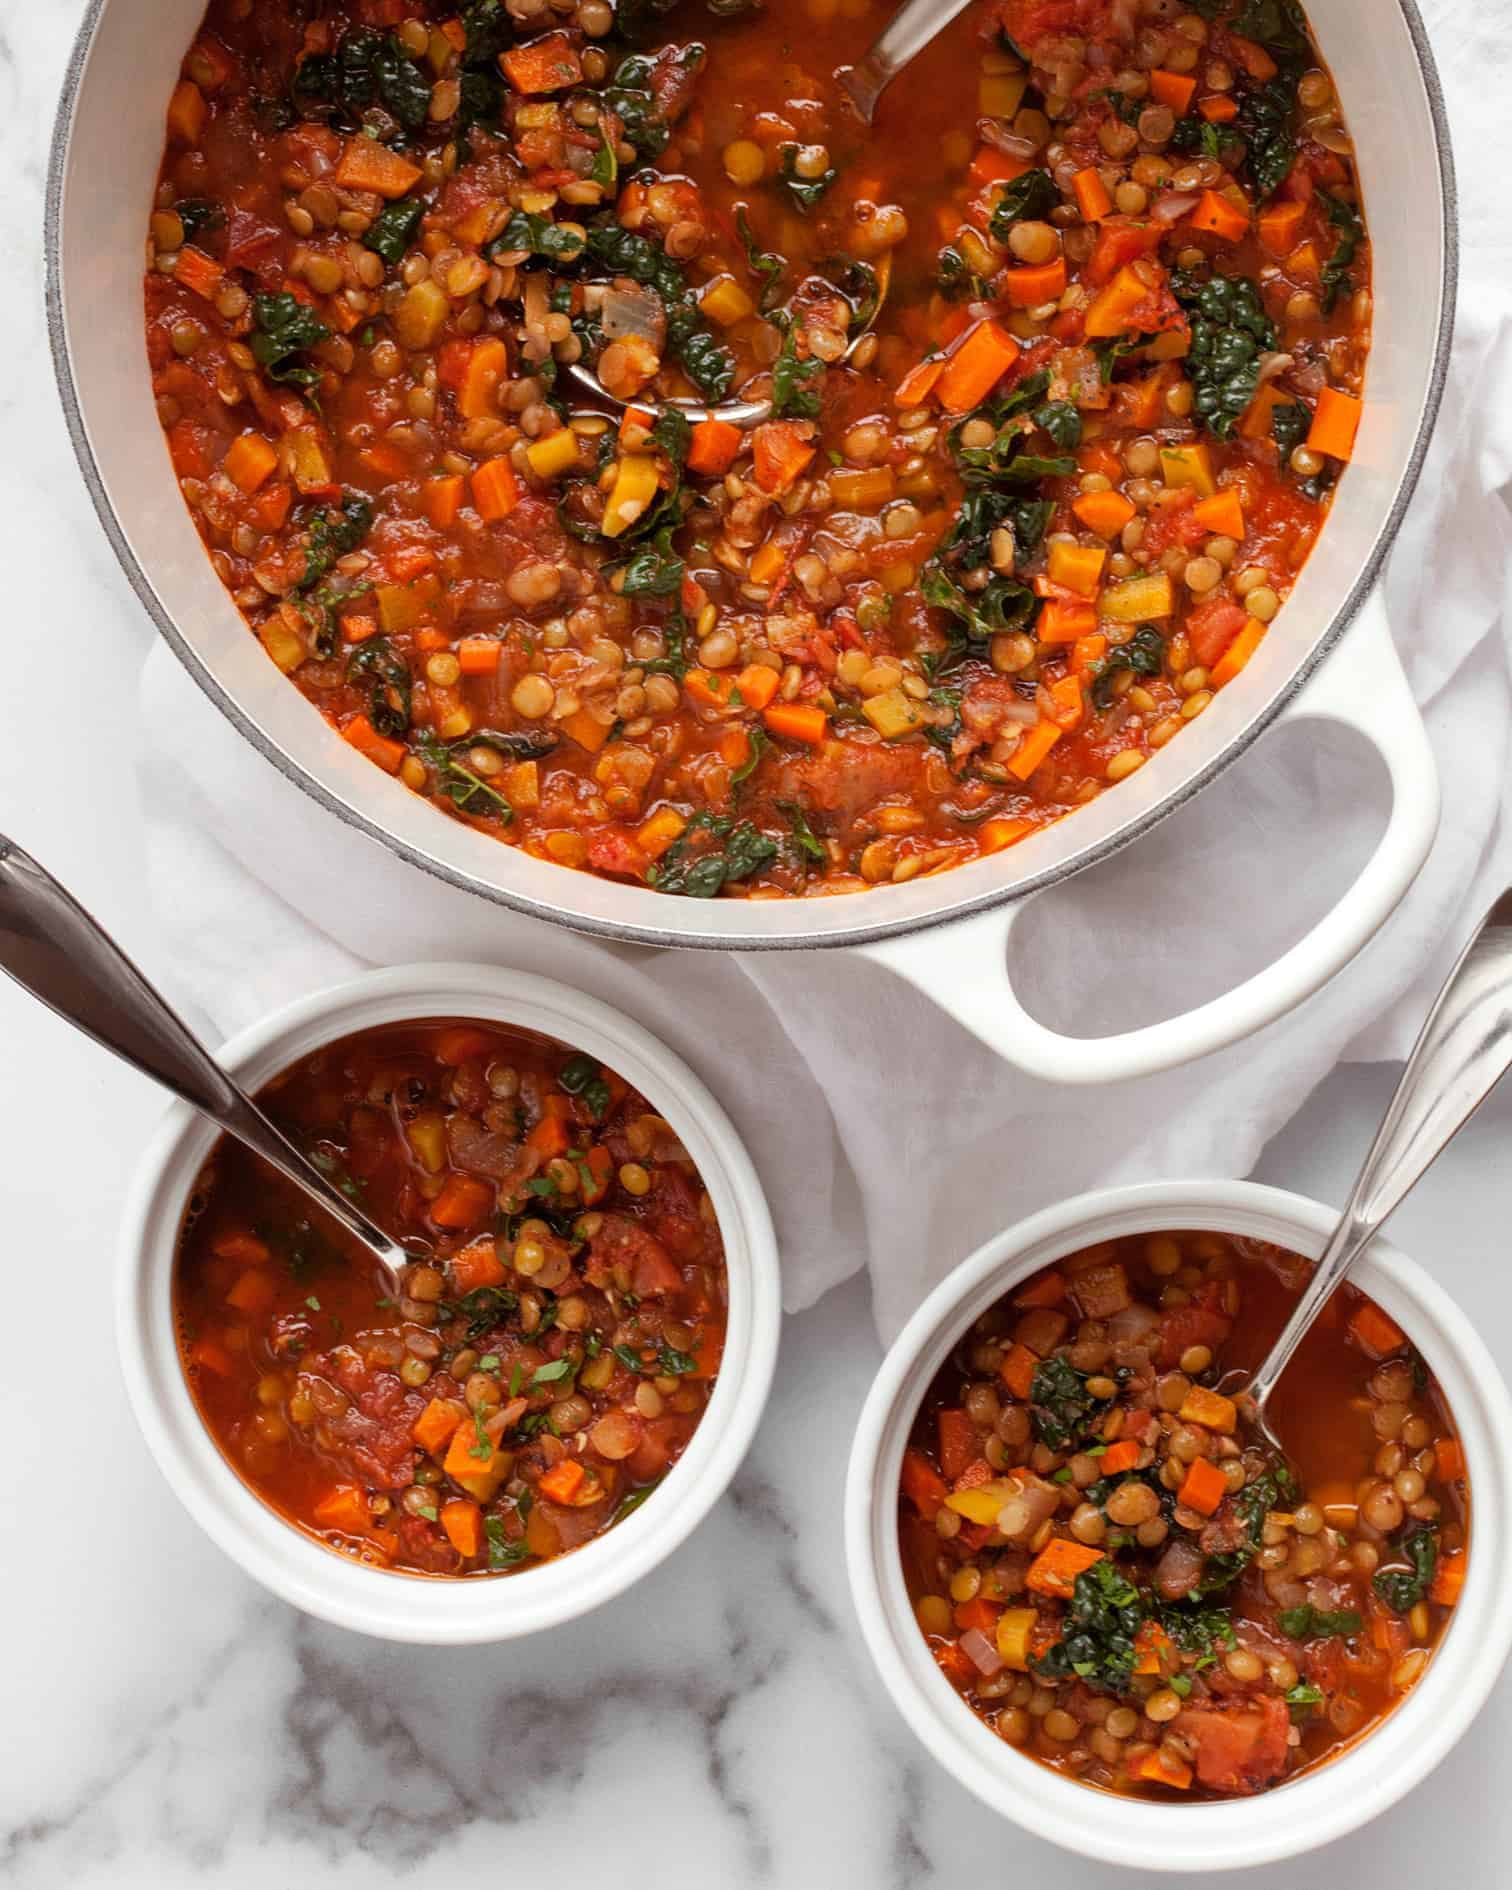 Carrot and Red Lentil Soup